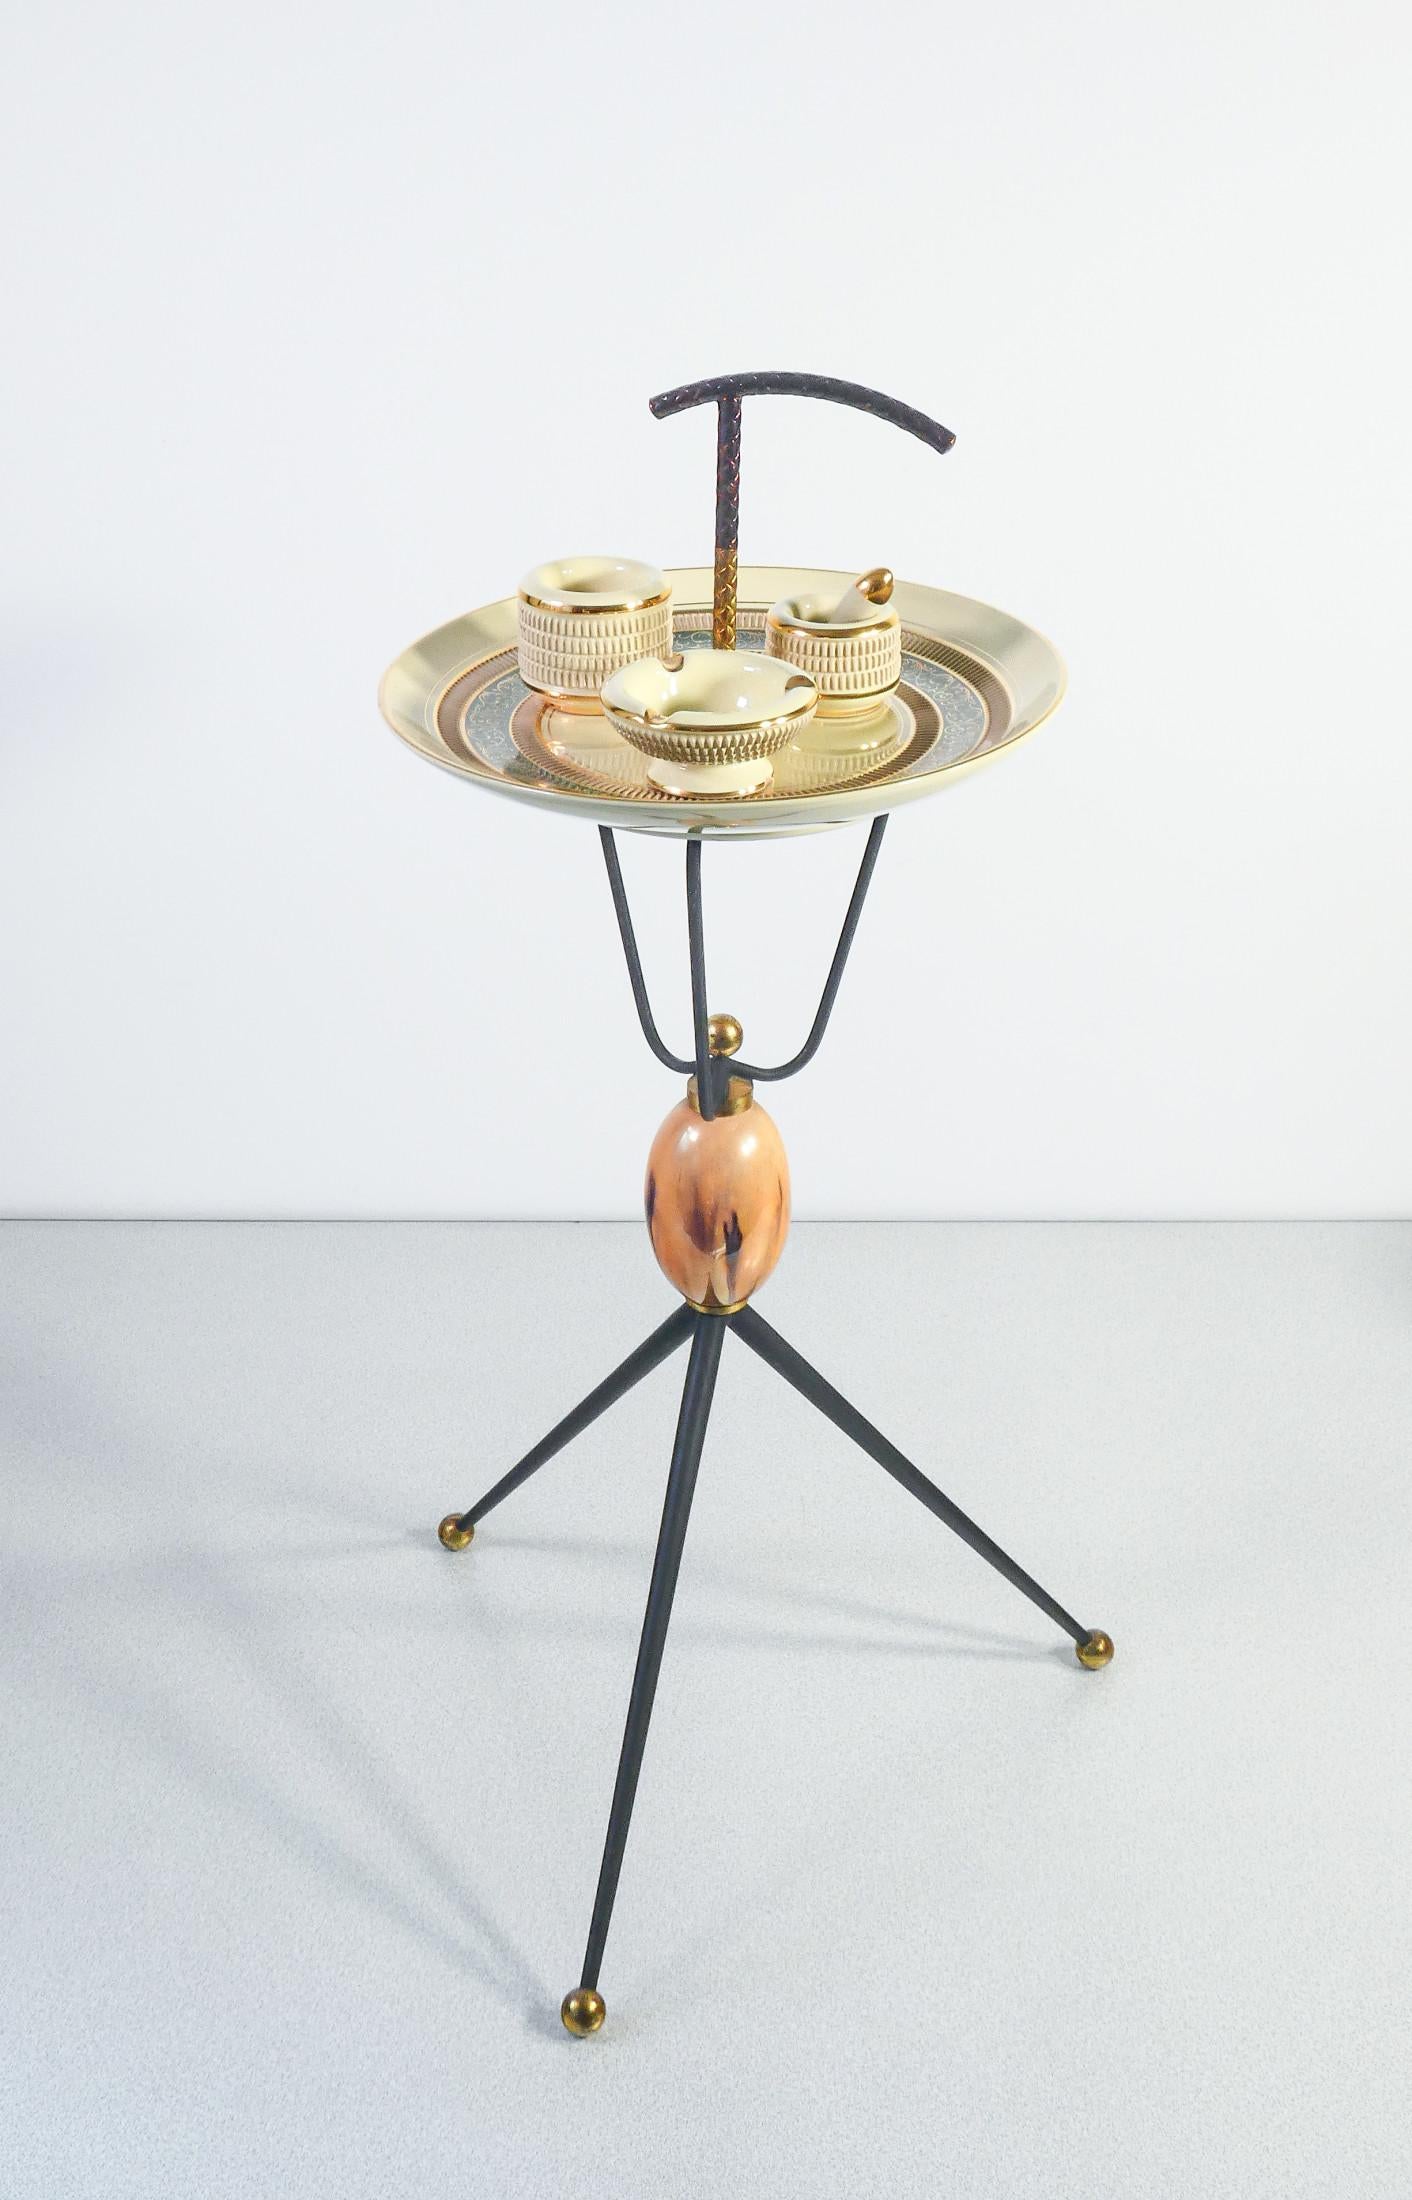 Ceramic smoking set
and metal composed of
an ashtray,
a small mortar and
a container, arranged
on tripod table.
Italy, 1950s/60s

ORIGIN
Italy

PERIOD
1950s/60s

MATERIALS
Ceramics and metal

DIMENSIONS
H 69 cm
Plate Ø 29 cm

CONDITIONS
The piece is